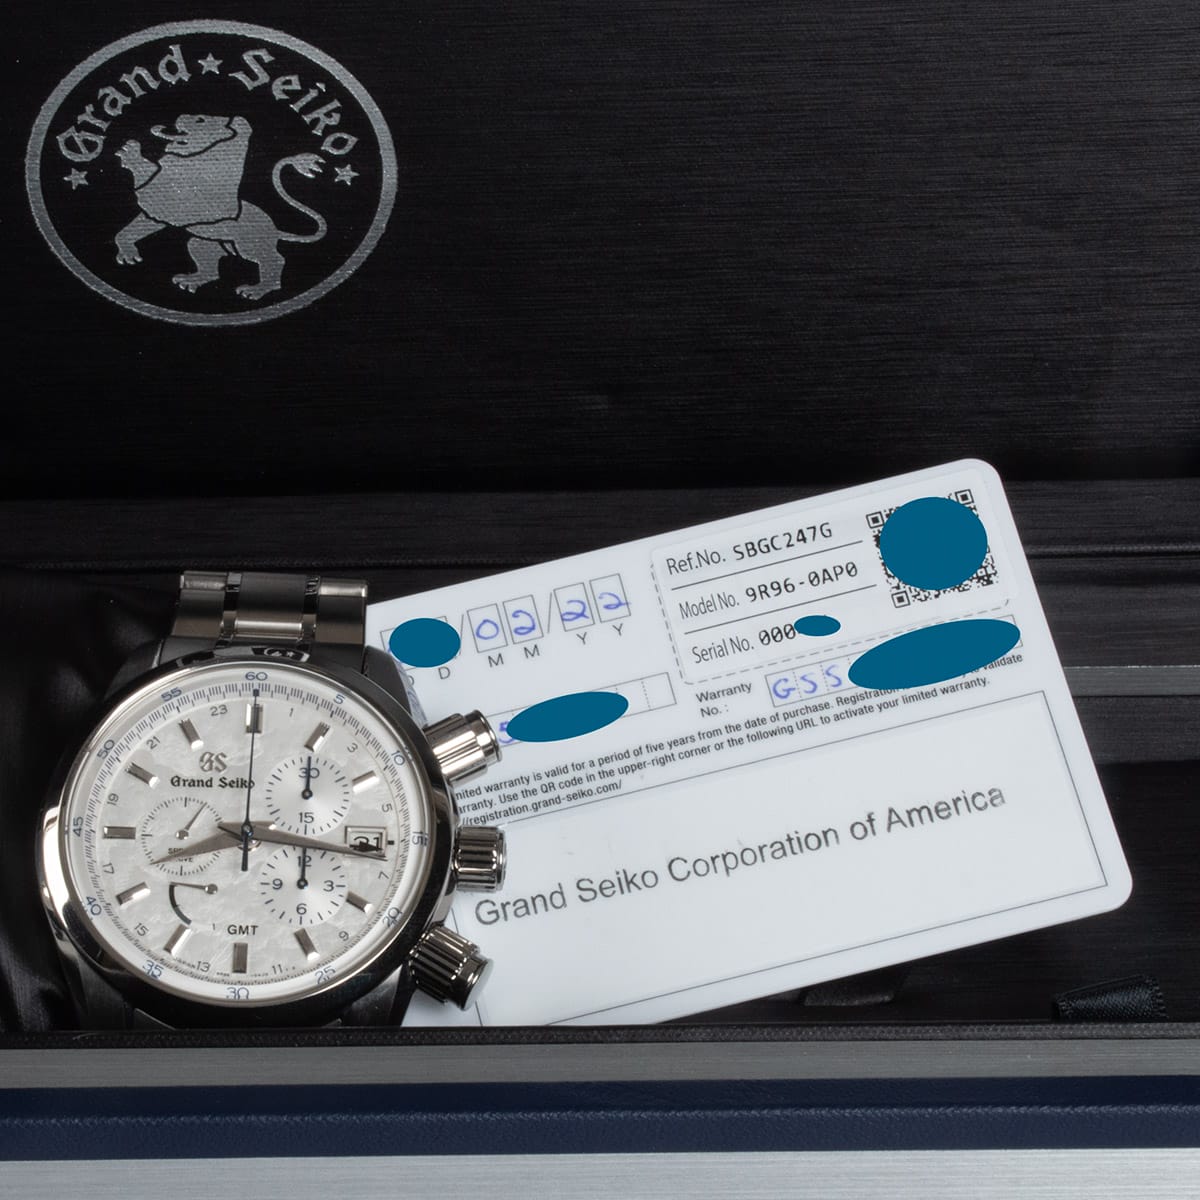 View in Box of Spring Drive Chronograph GMT '15th Anniversary'